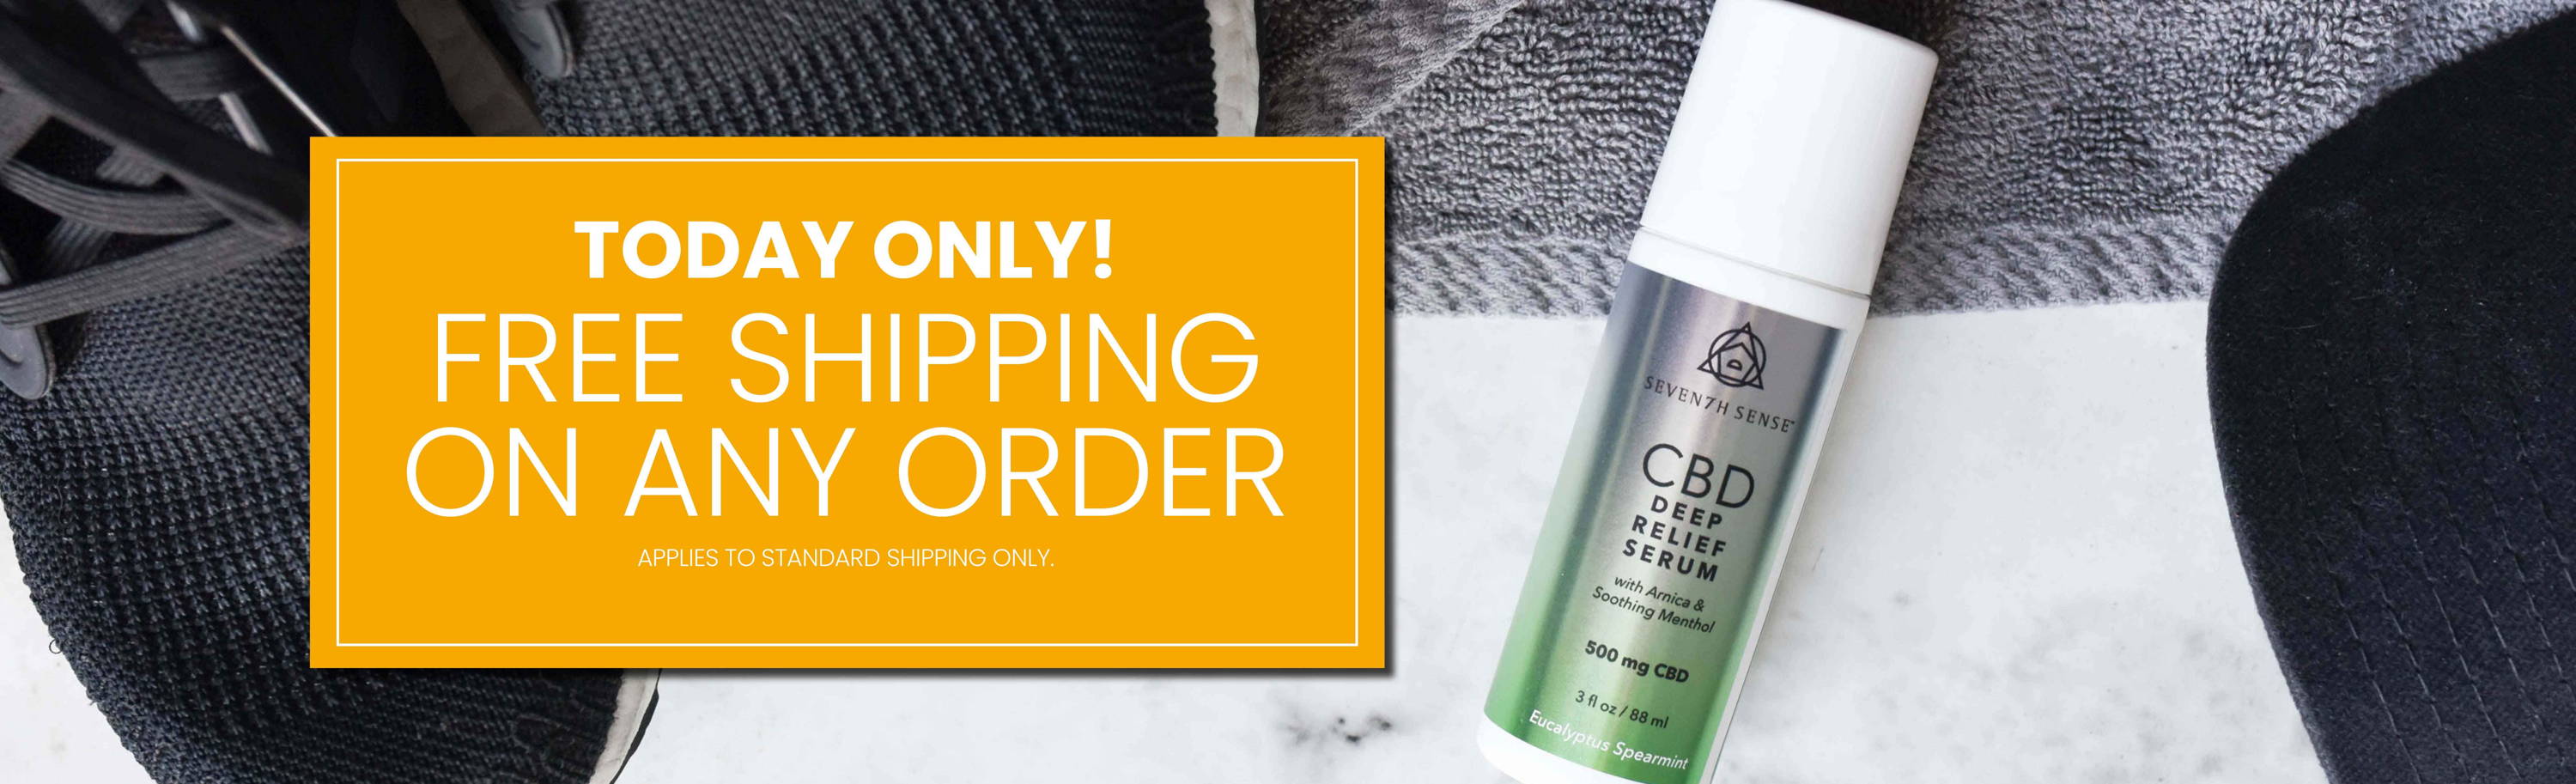 ODAY ONLY. Free Shipping on ANY Order. Only Valid 9/28. Applies to standard shipping only.